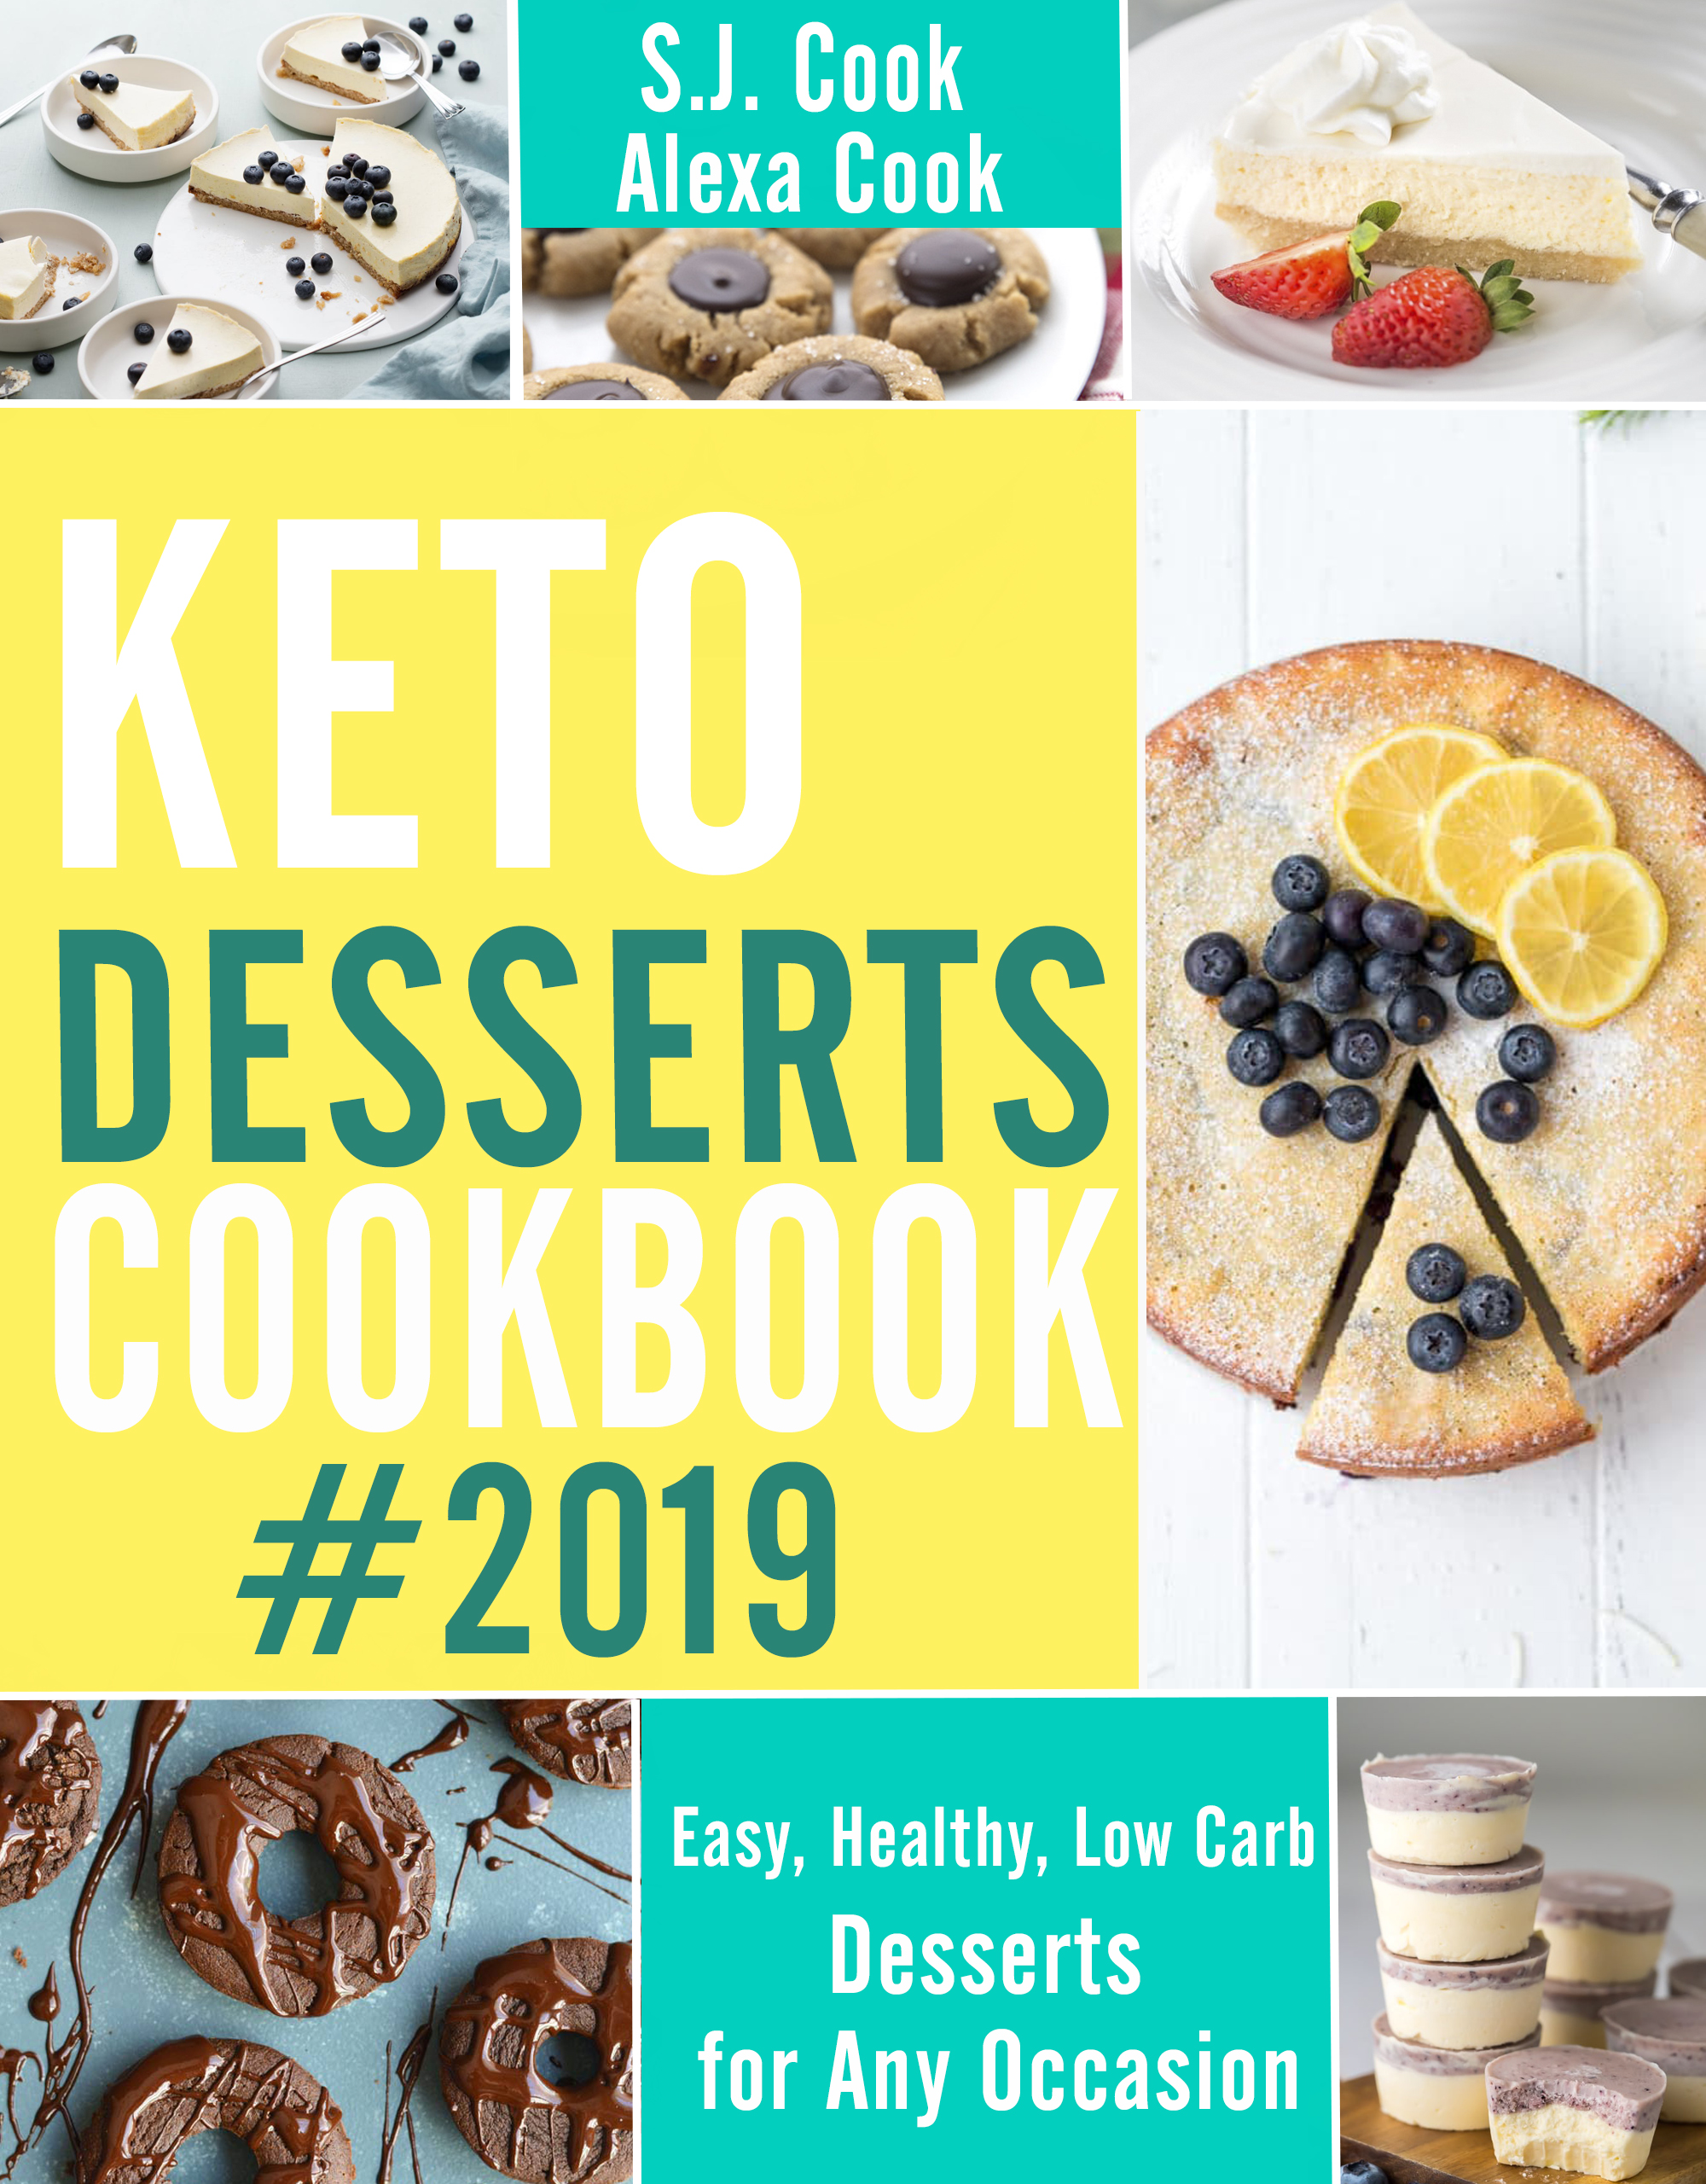 FREE: Keto Desserts Cookbook : Easy, Healthy, Low-Carb Desserts for any Occasion by S.J. Cook